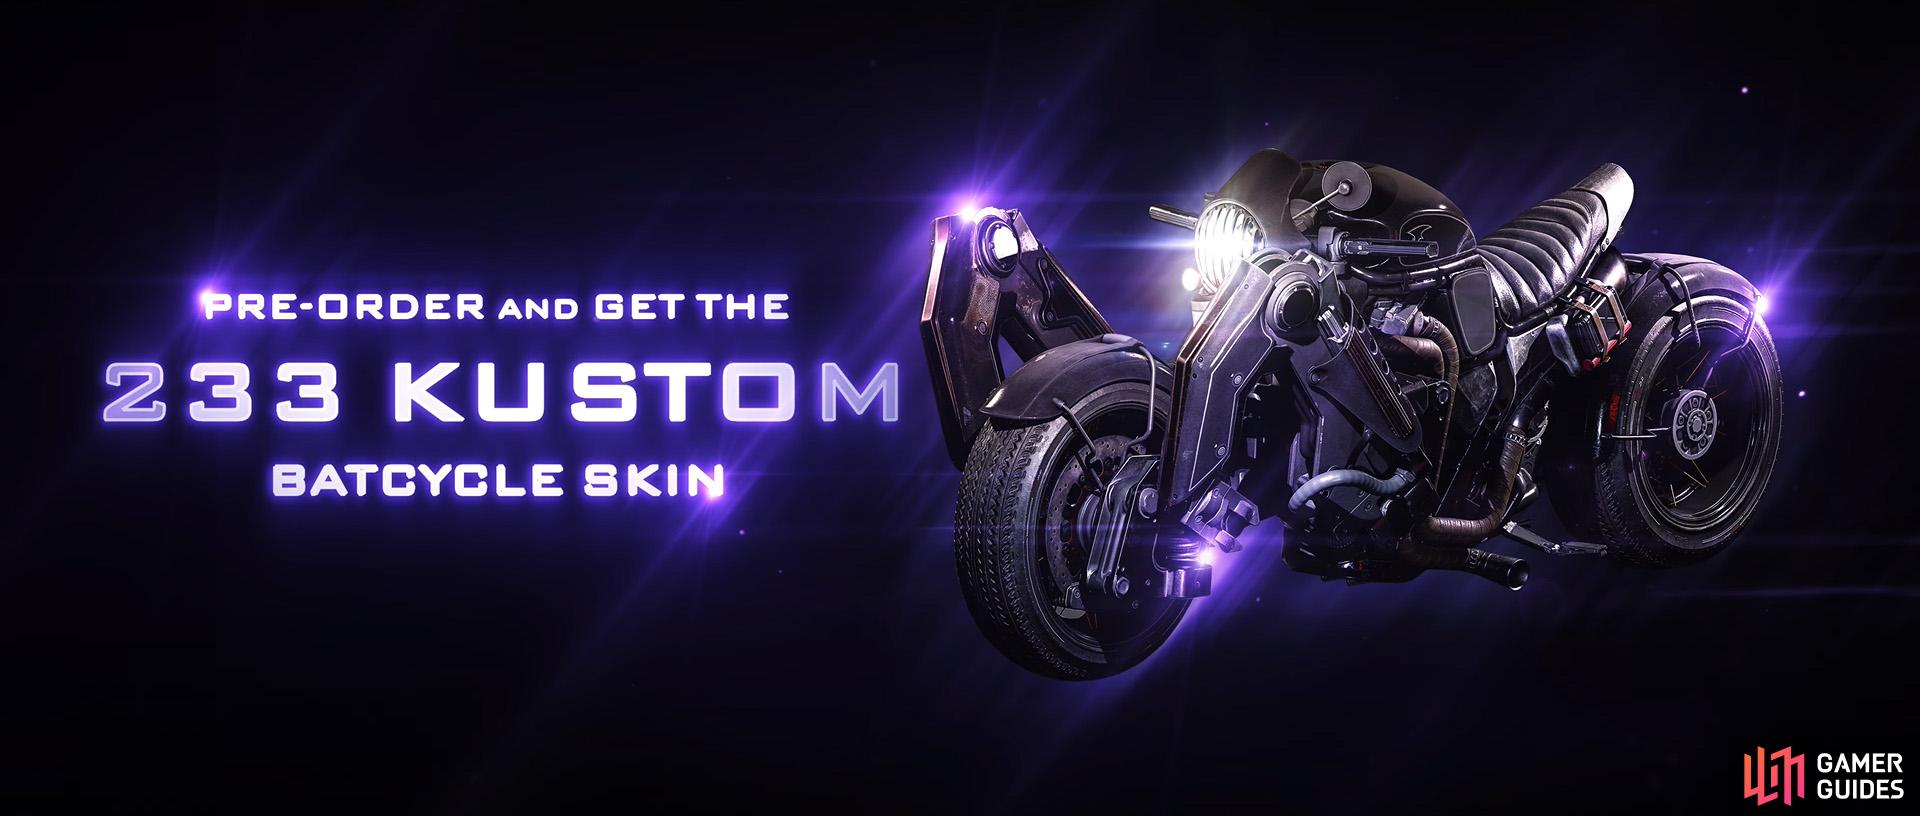 The Kustom Batcycle Skin, only available for free if you pre-order the game.